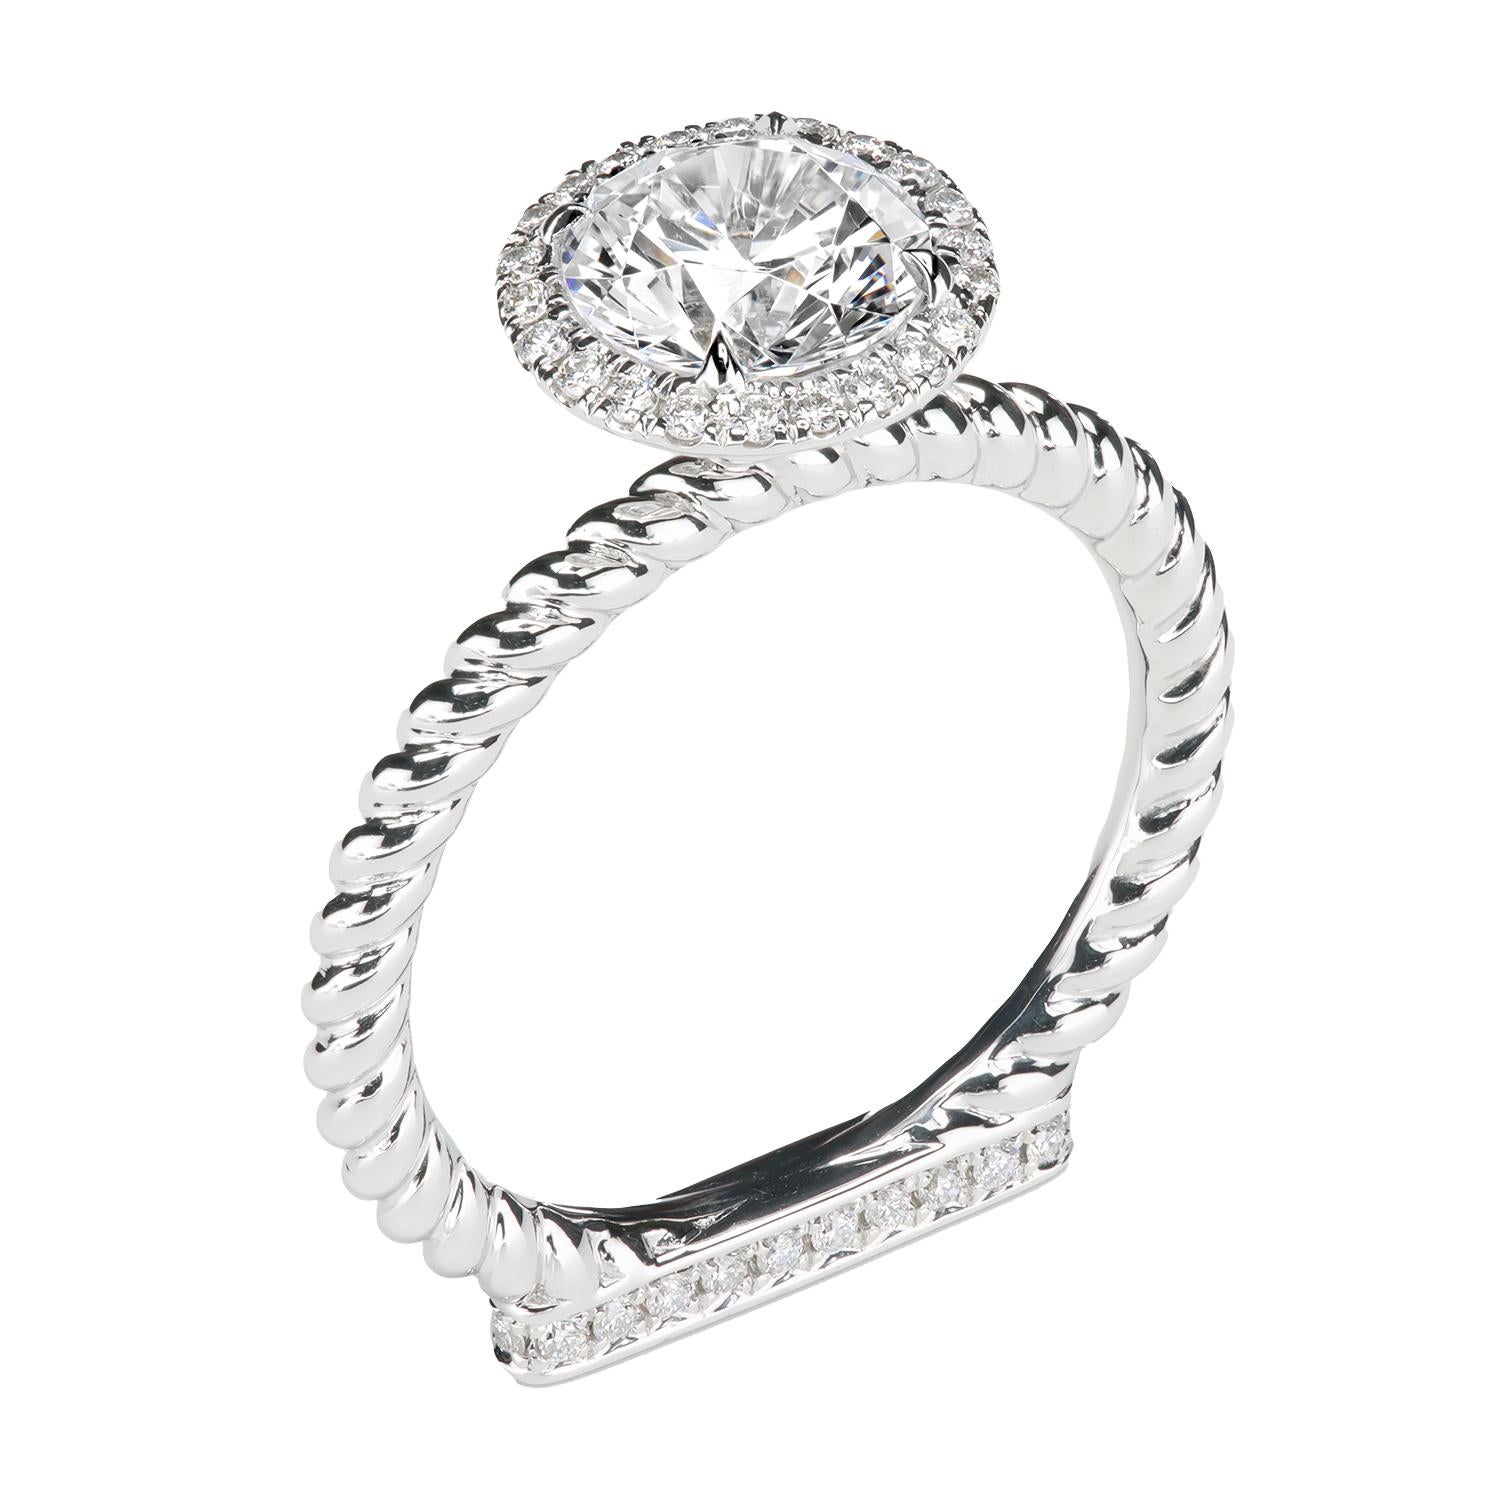 For Sale:  Leon Mege platinum halo engagement rings with round diamond 4